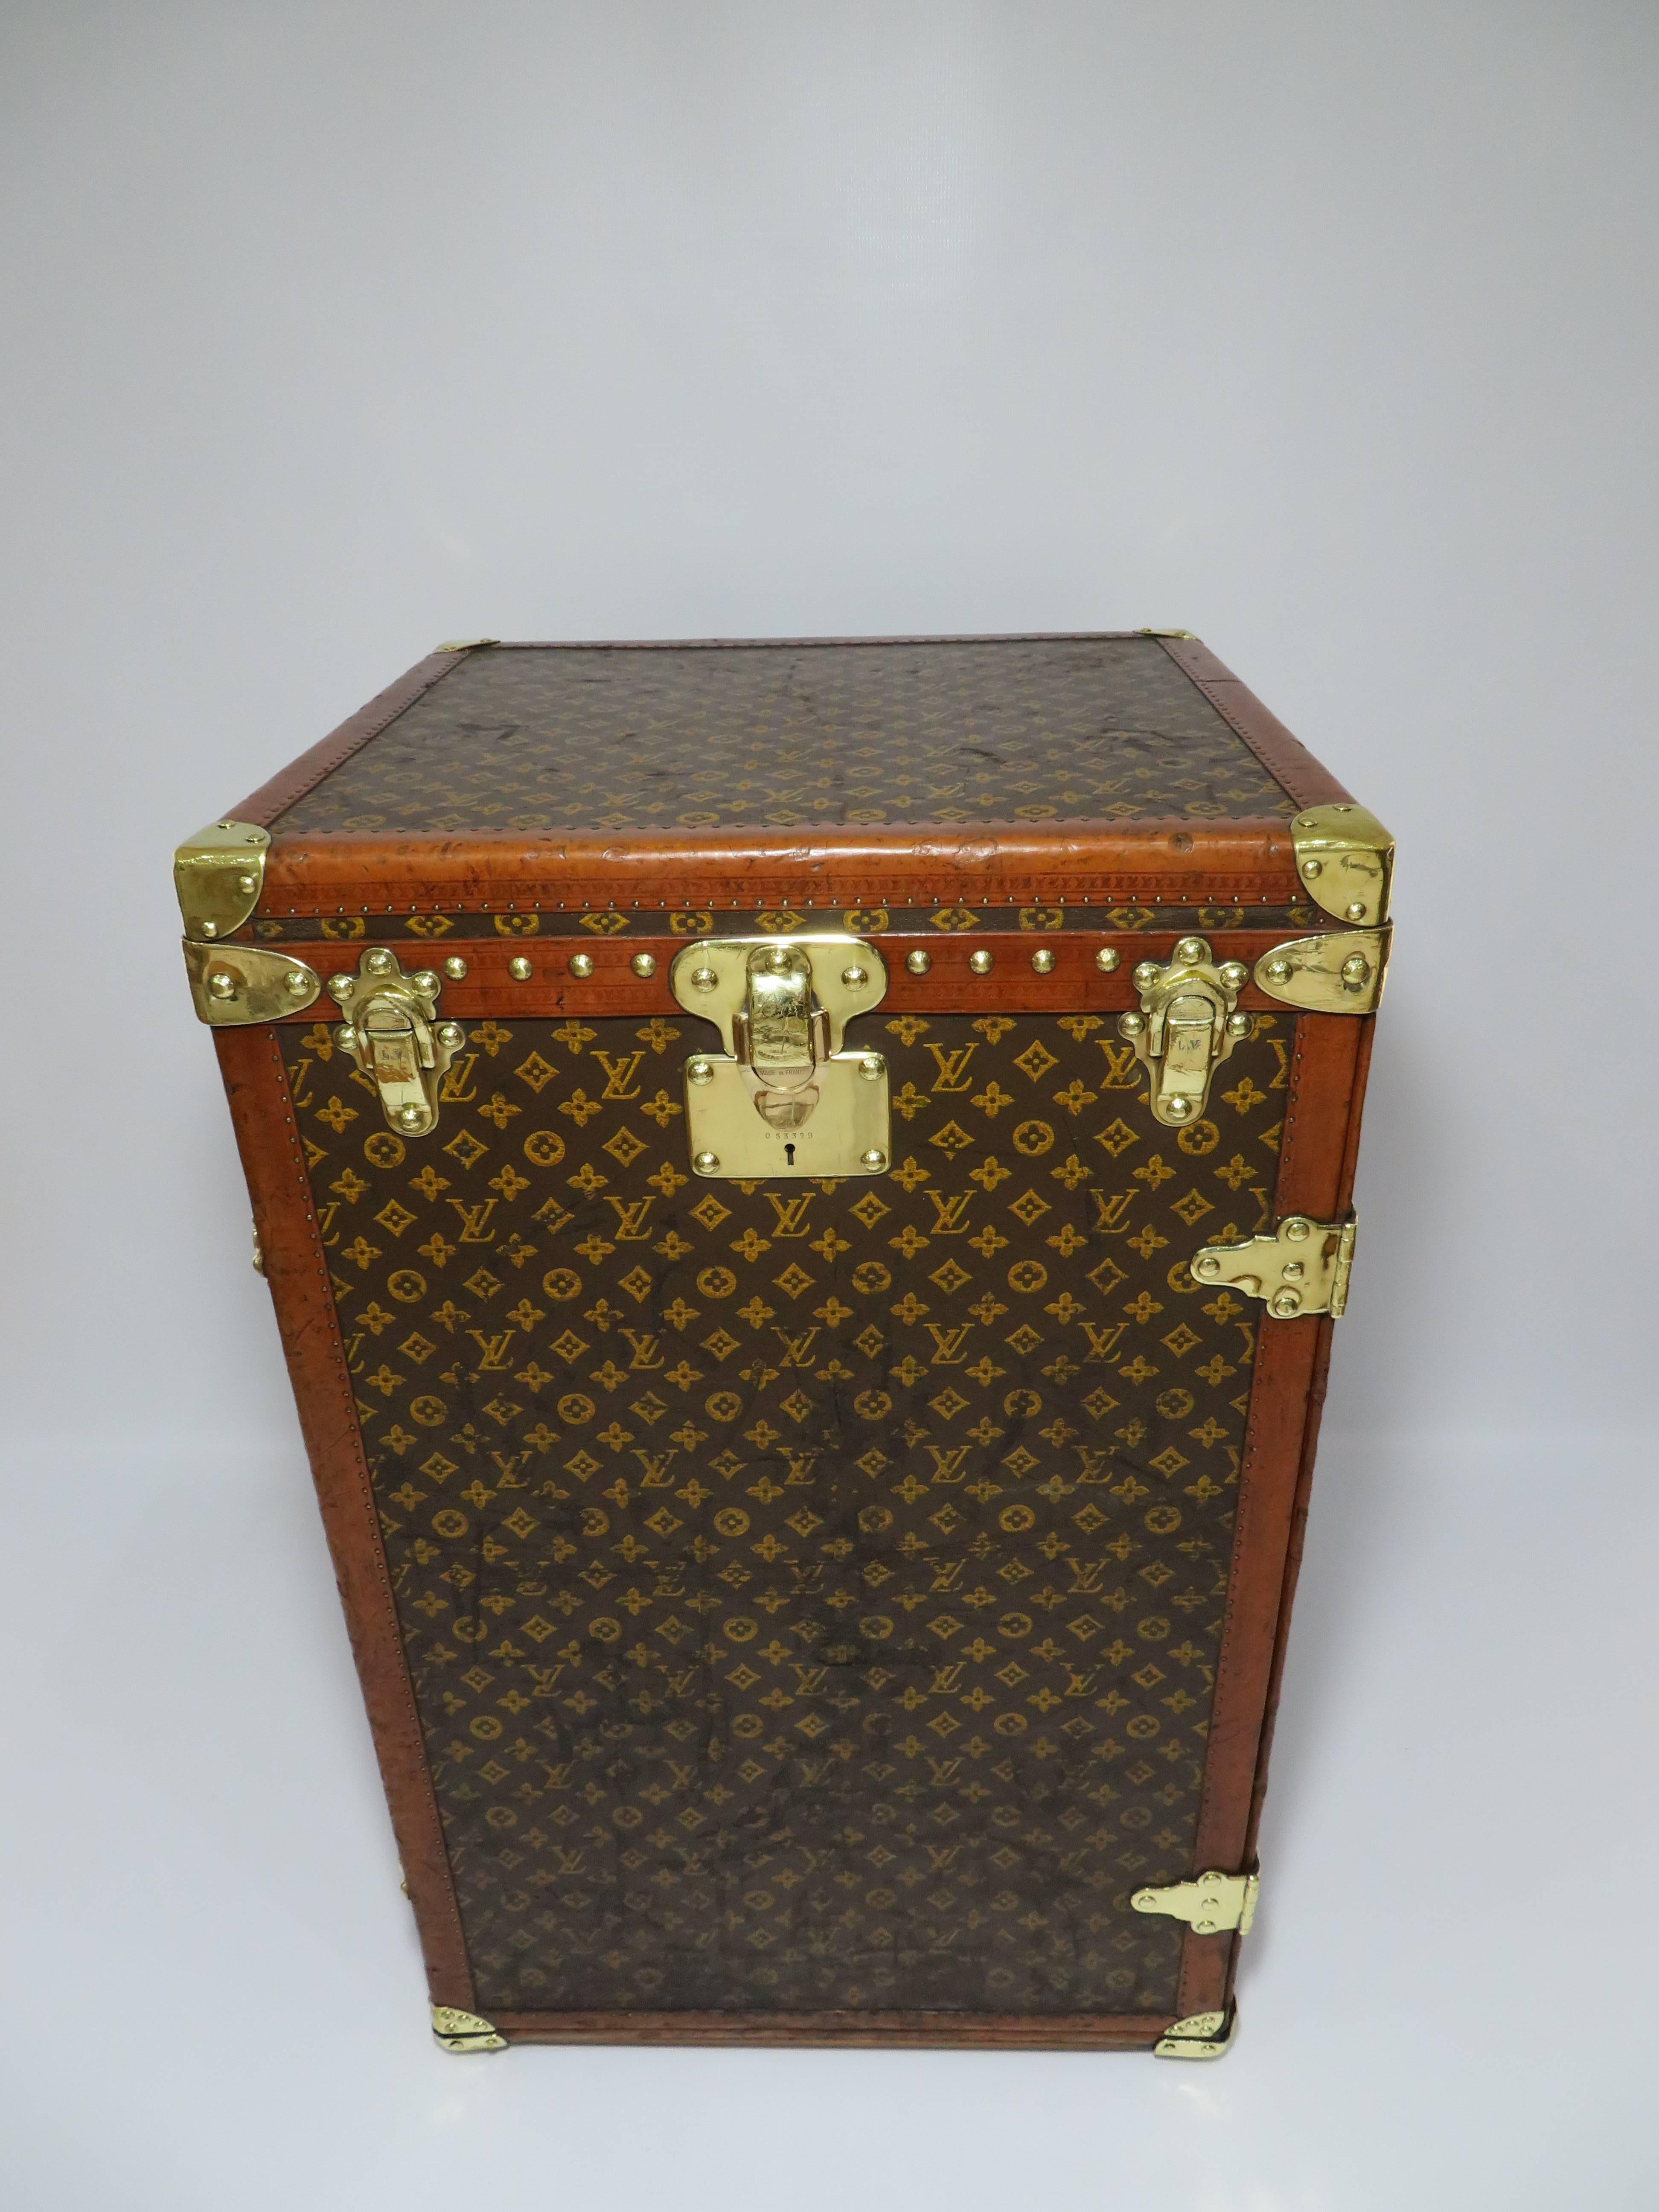 For sale one of the 100 legendary trunks of the Louis Vuitton book, a very rare Louis Vuitton secretaire or desk trunk covered in monogram canvas, with brass hardware and complete interior. 

In very good condition for age considering the rarity